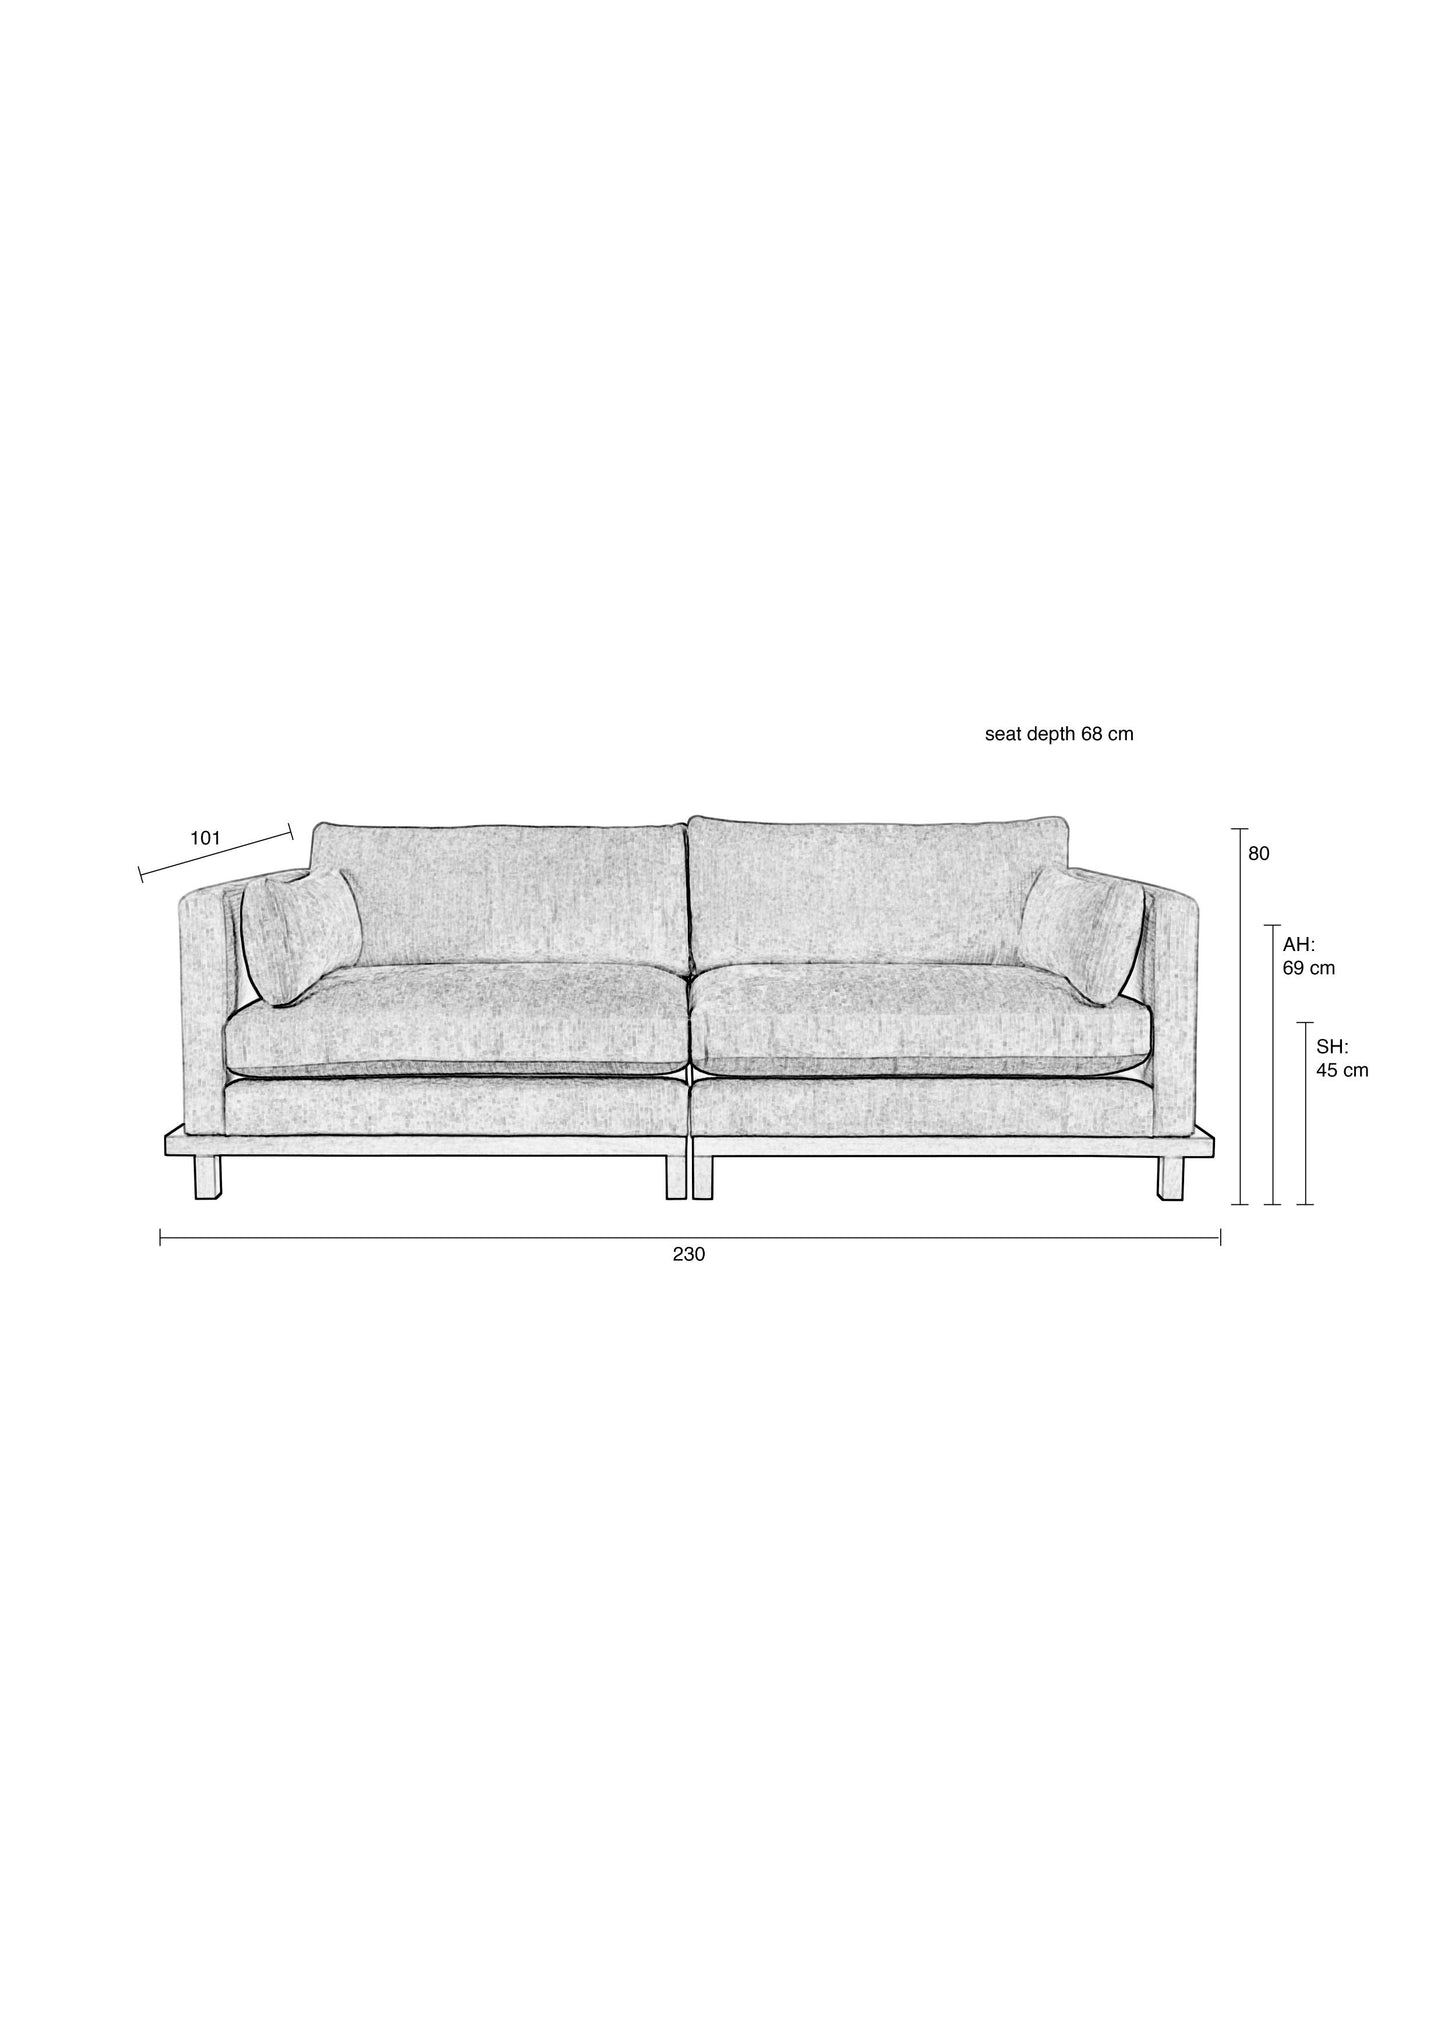 Zuiver | SOFA BLOSSOM 3-SEATER SAND Default Title